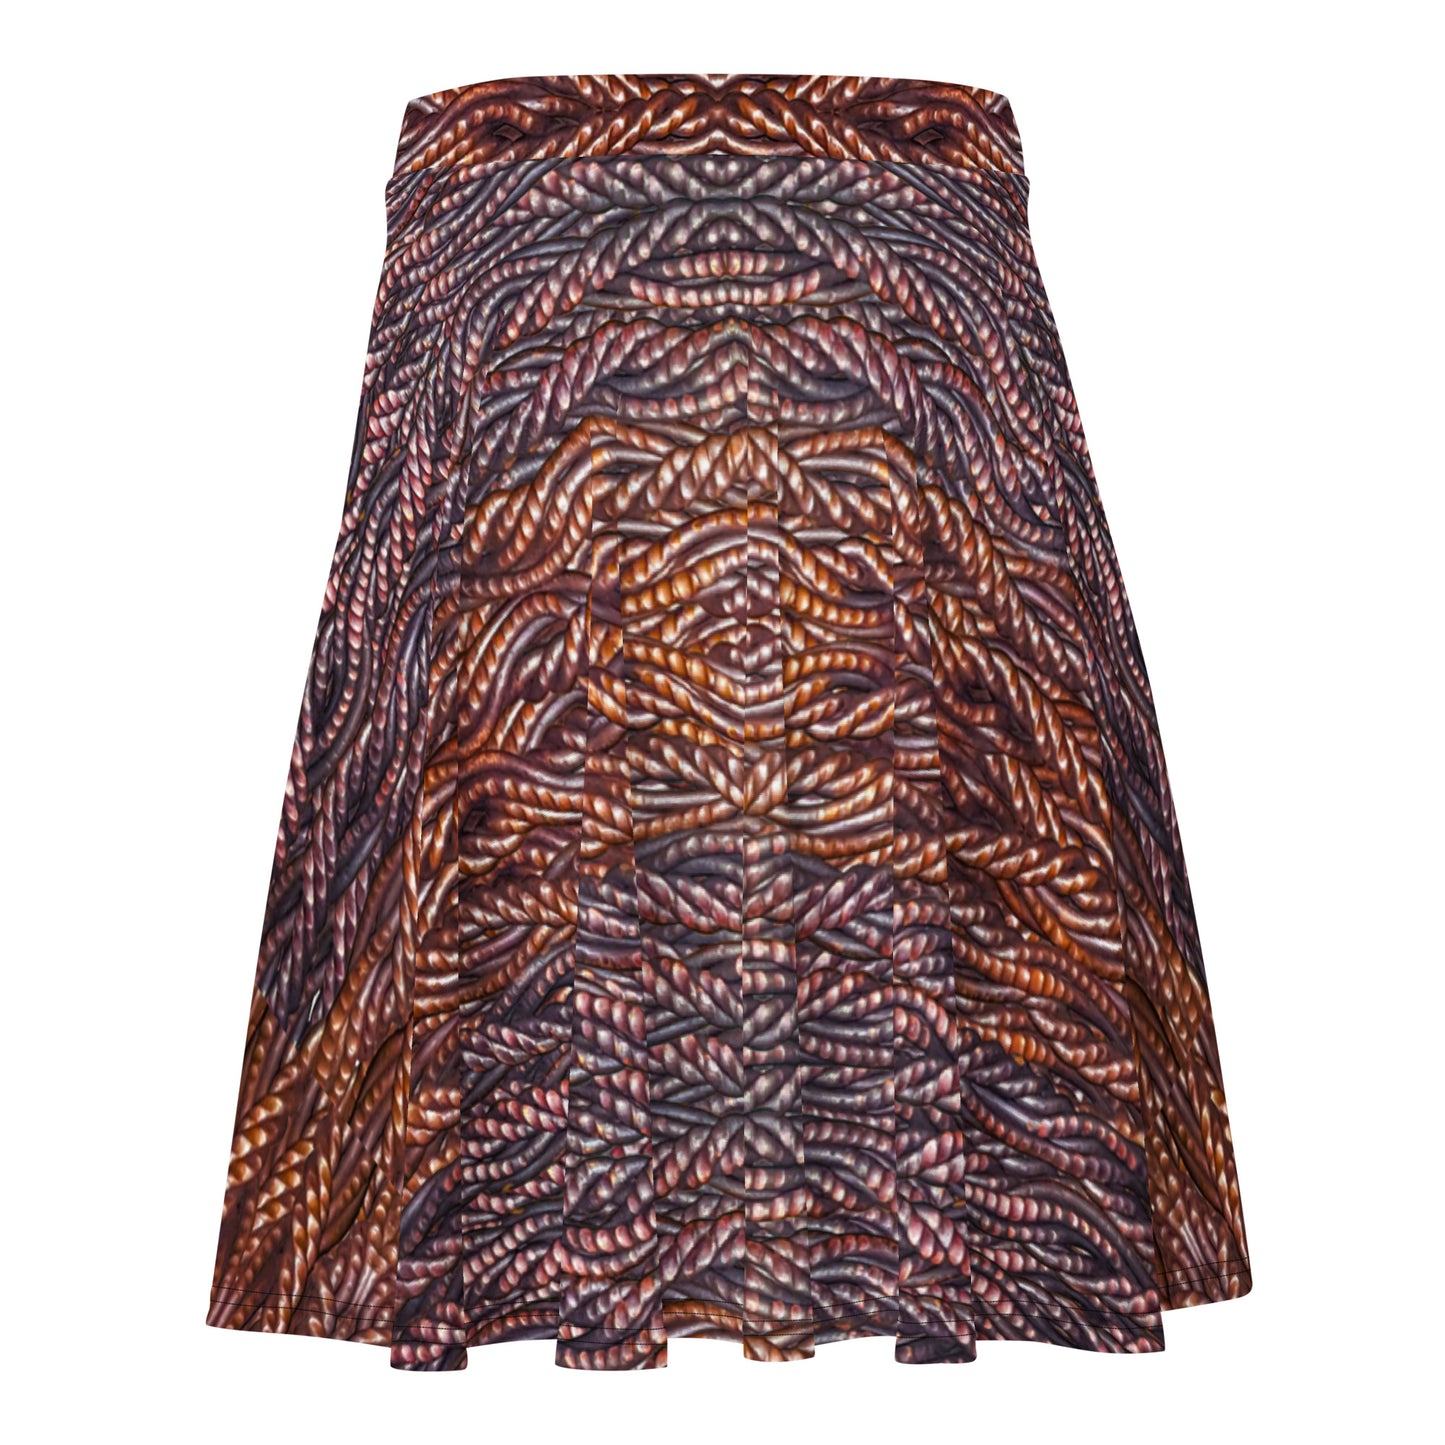 Skater Skirt (Her/They)(Grail Hearth Core Copper Fabric) RJSTHw2023 RJS